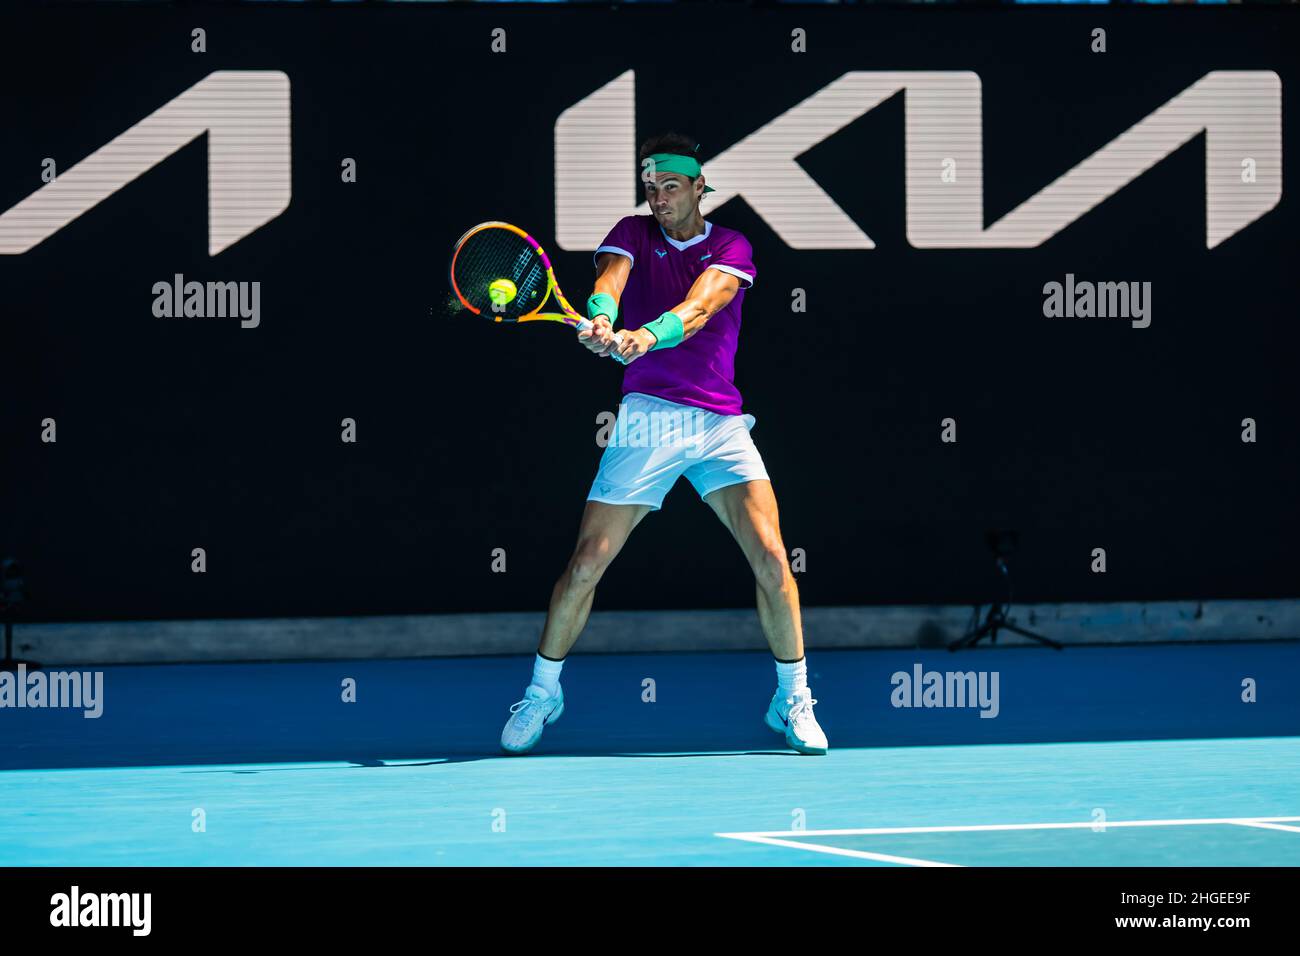 Rafael Nadal hitting the ball with his racquet during the match with Marcos Giron during the Australian Open 2022 Round 1 match of the Grand Slam at Rod Laver Arena in Melbourne Olympic Park.(Final score Nadal wins in 3 sets 6:1, 6:4, 6:2). Stock Photo